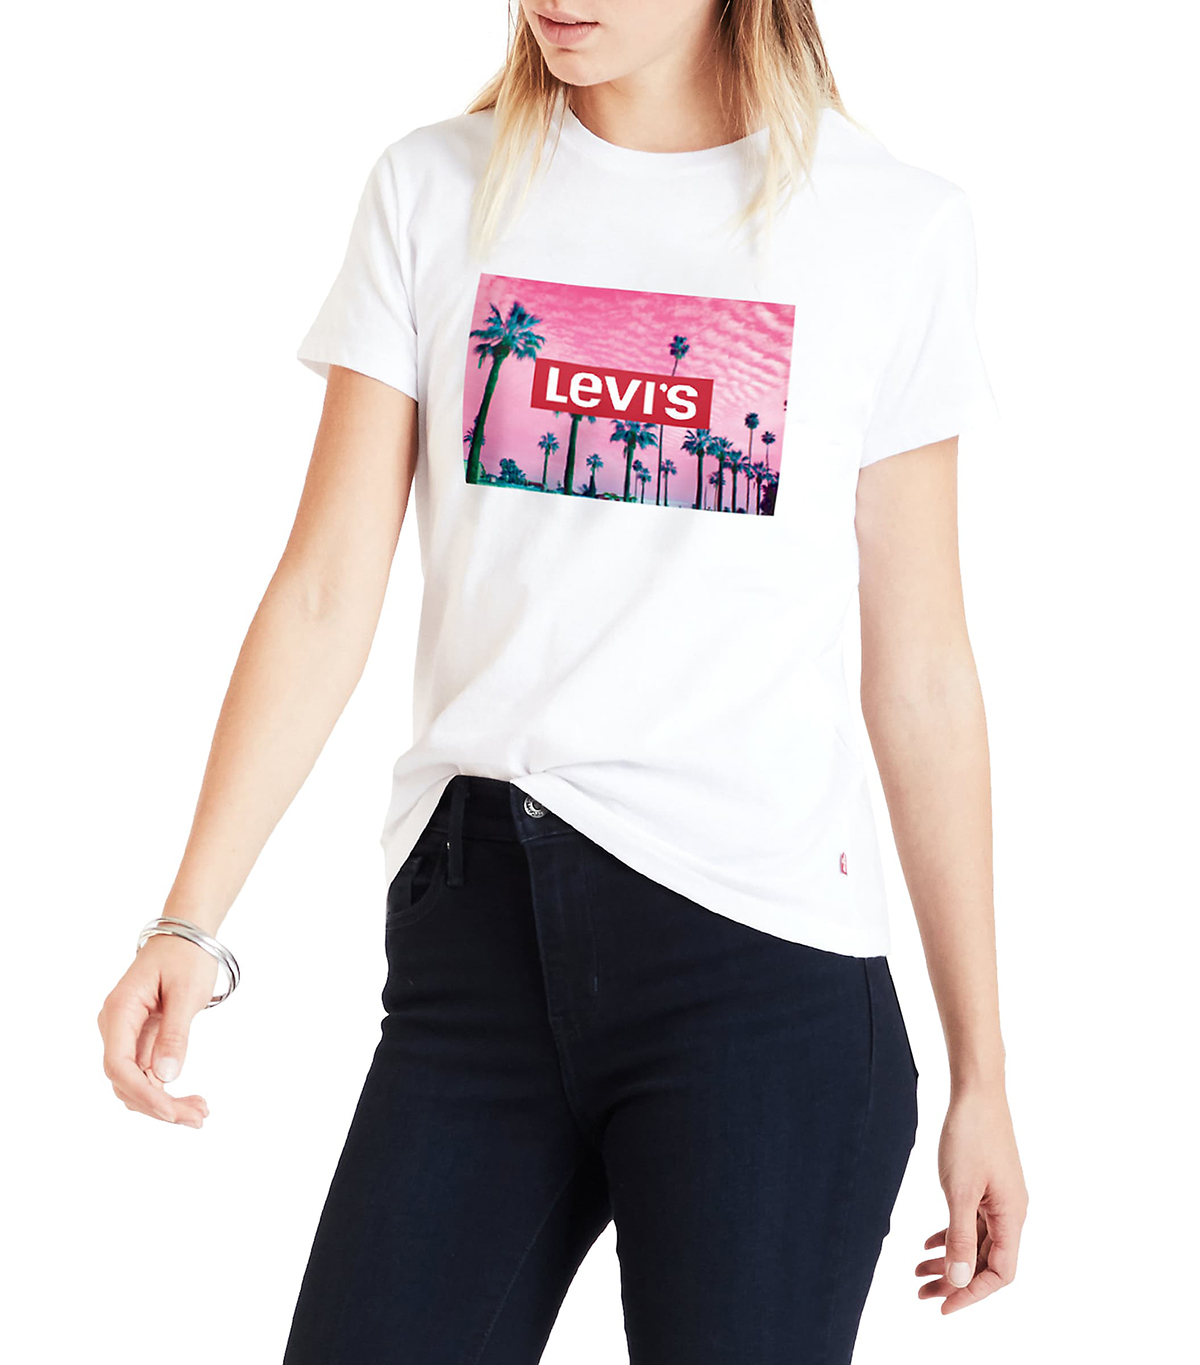 Levi's Logo T-Shirts Are Extremely 